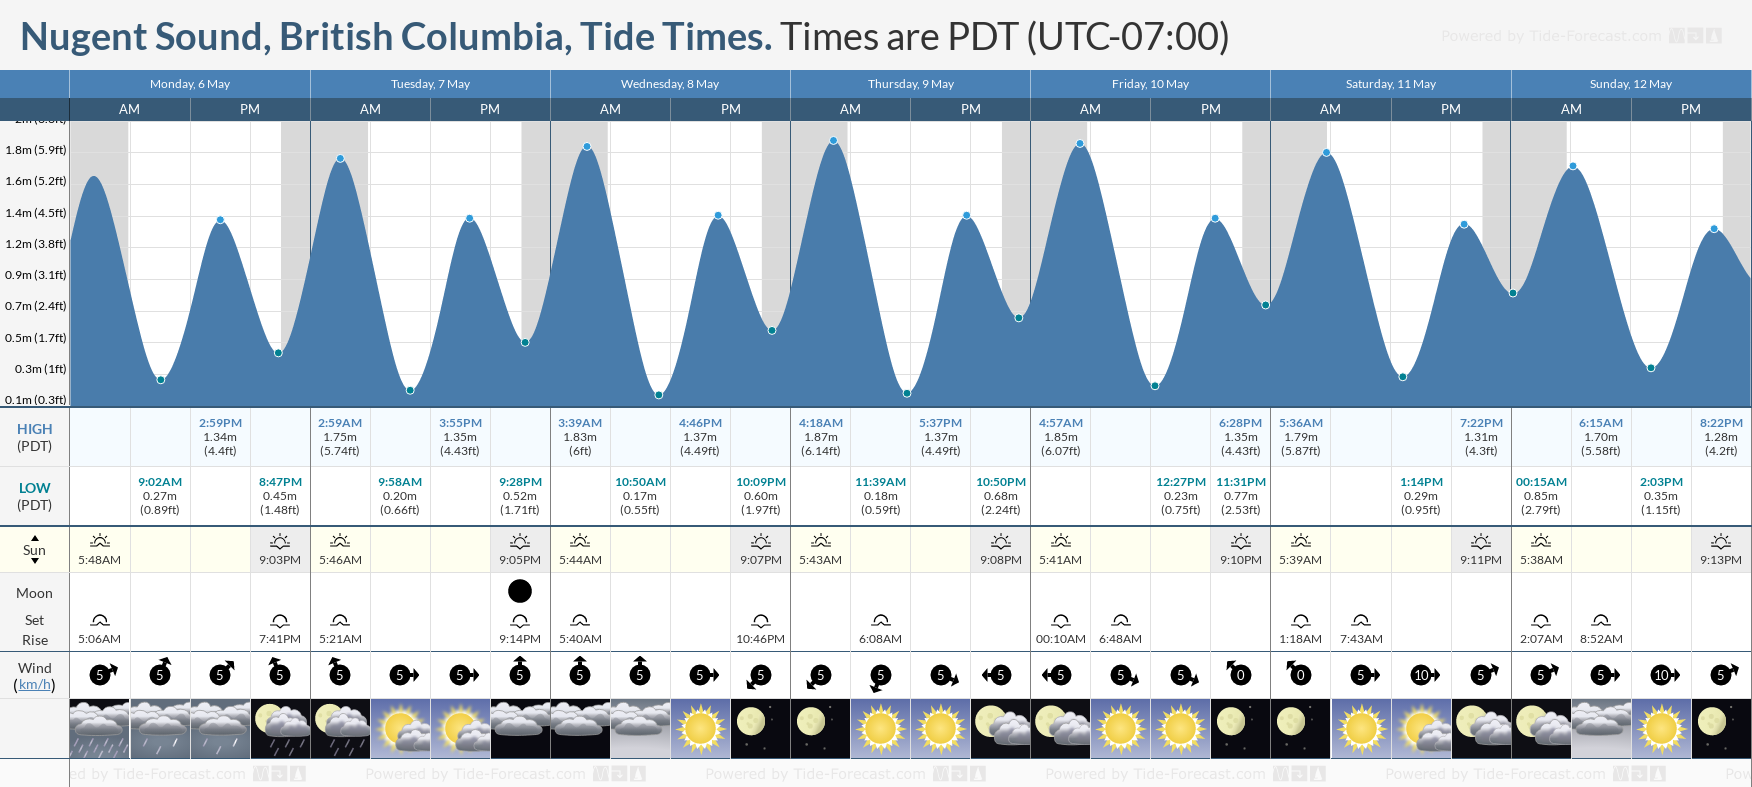 Nugent Sound, British Columbia Tide Chart including high and low tide tide times for the next 7 days